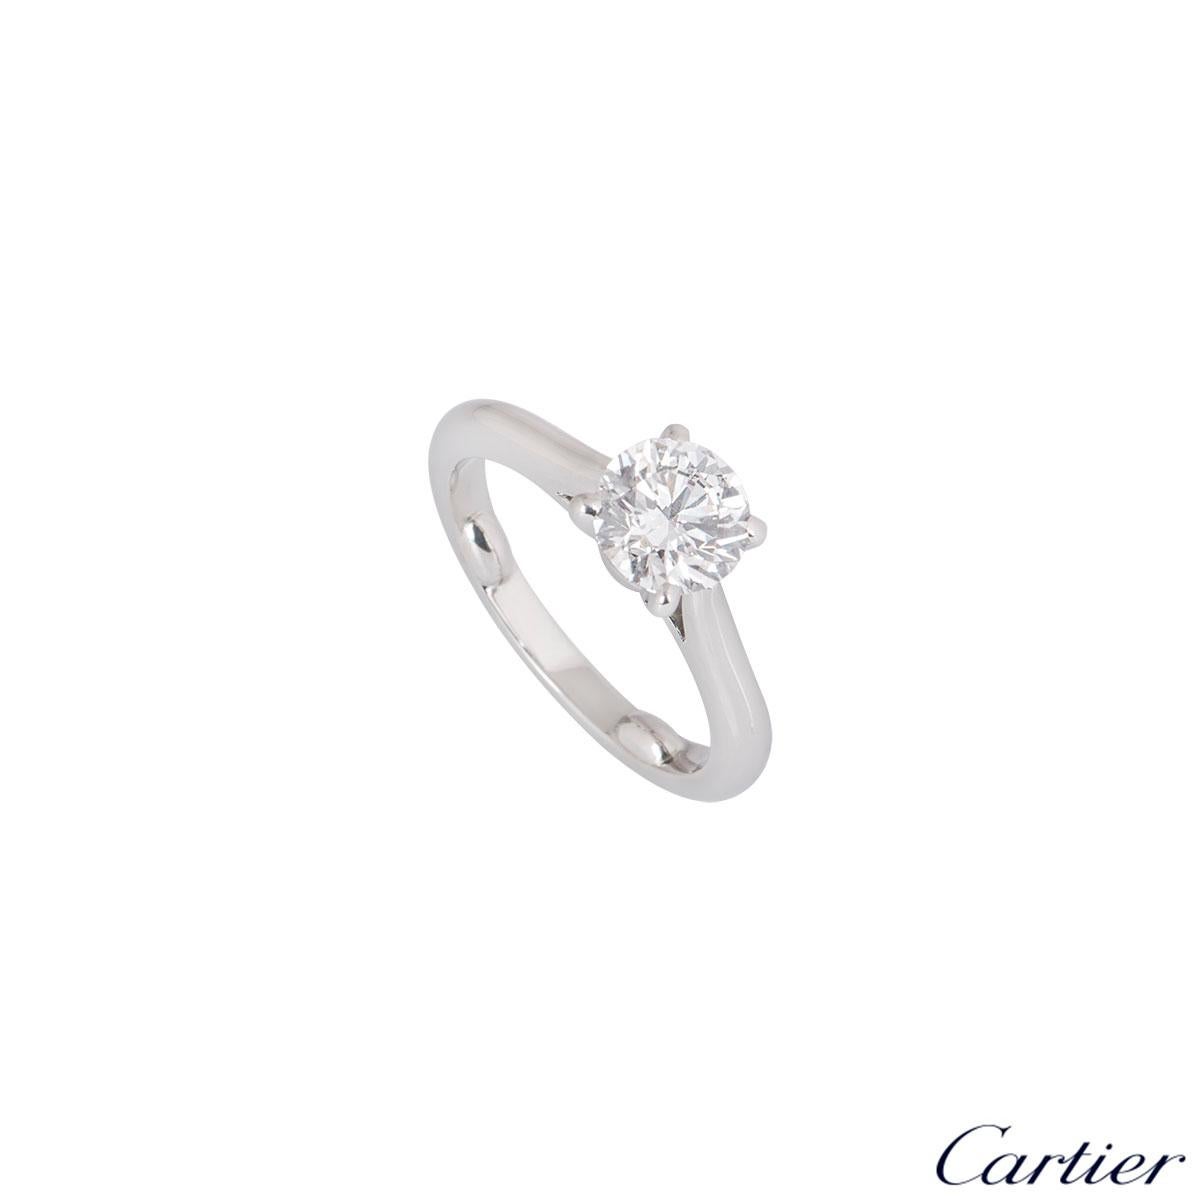 A stunning platinum diamond engagement ring by Cartier from the 1895 solitaire collection. The ring comprises of a round brilliant cut diamond in a four claw setting with a weight of 1.16ct, G colour and VVS1 clarity. The diamond scores an excellent